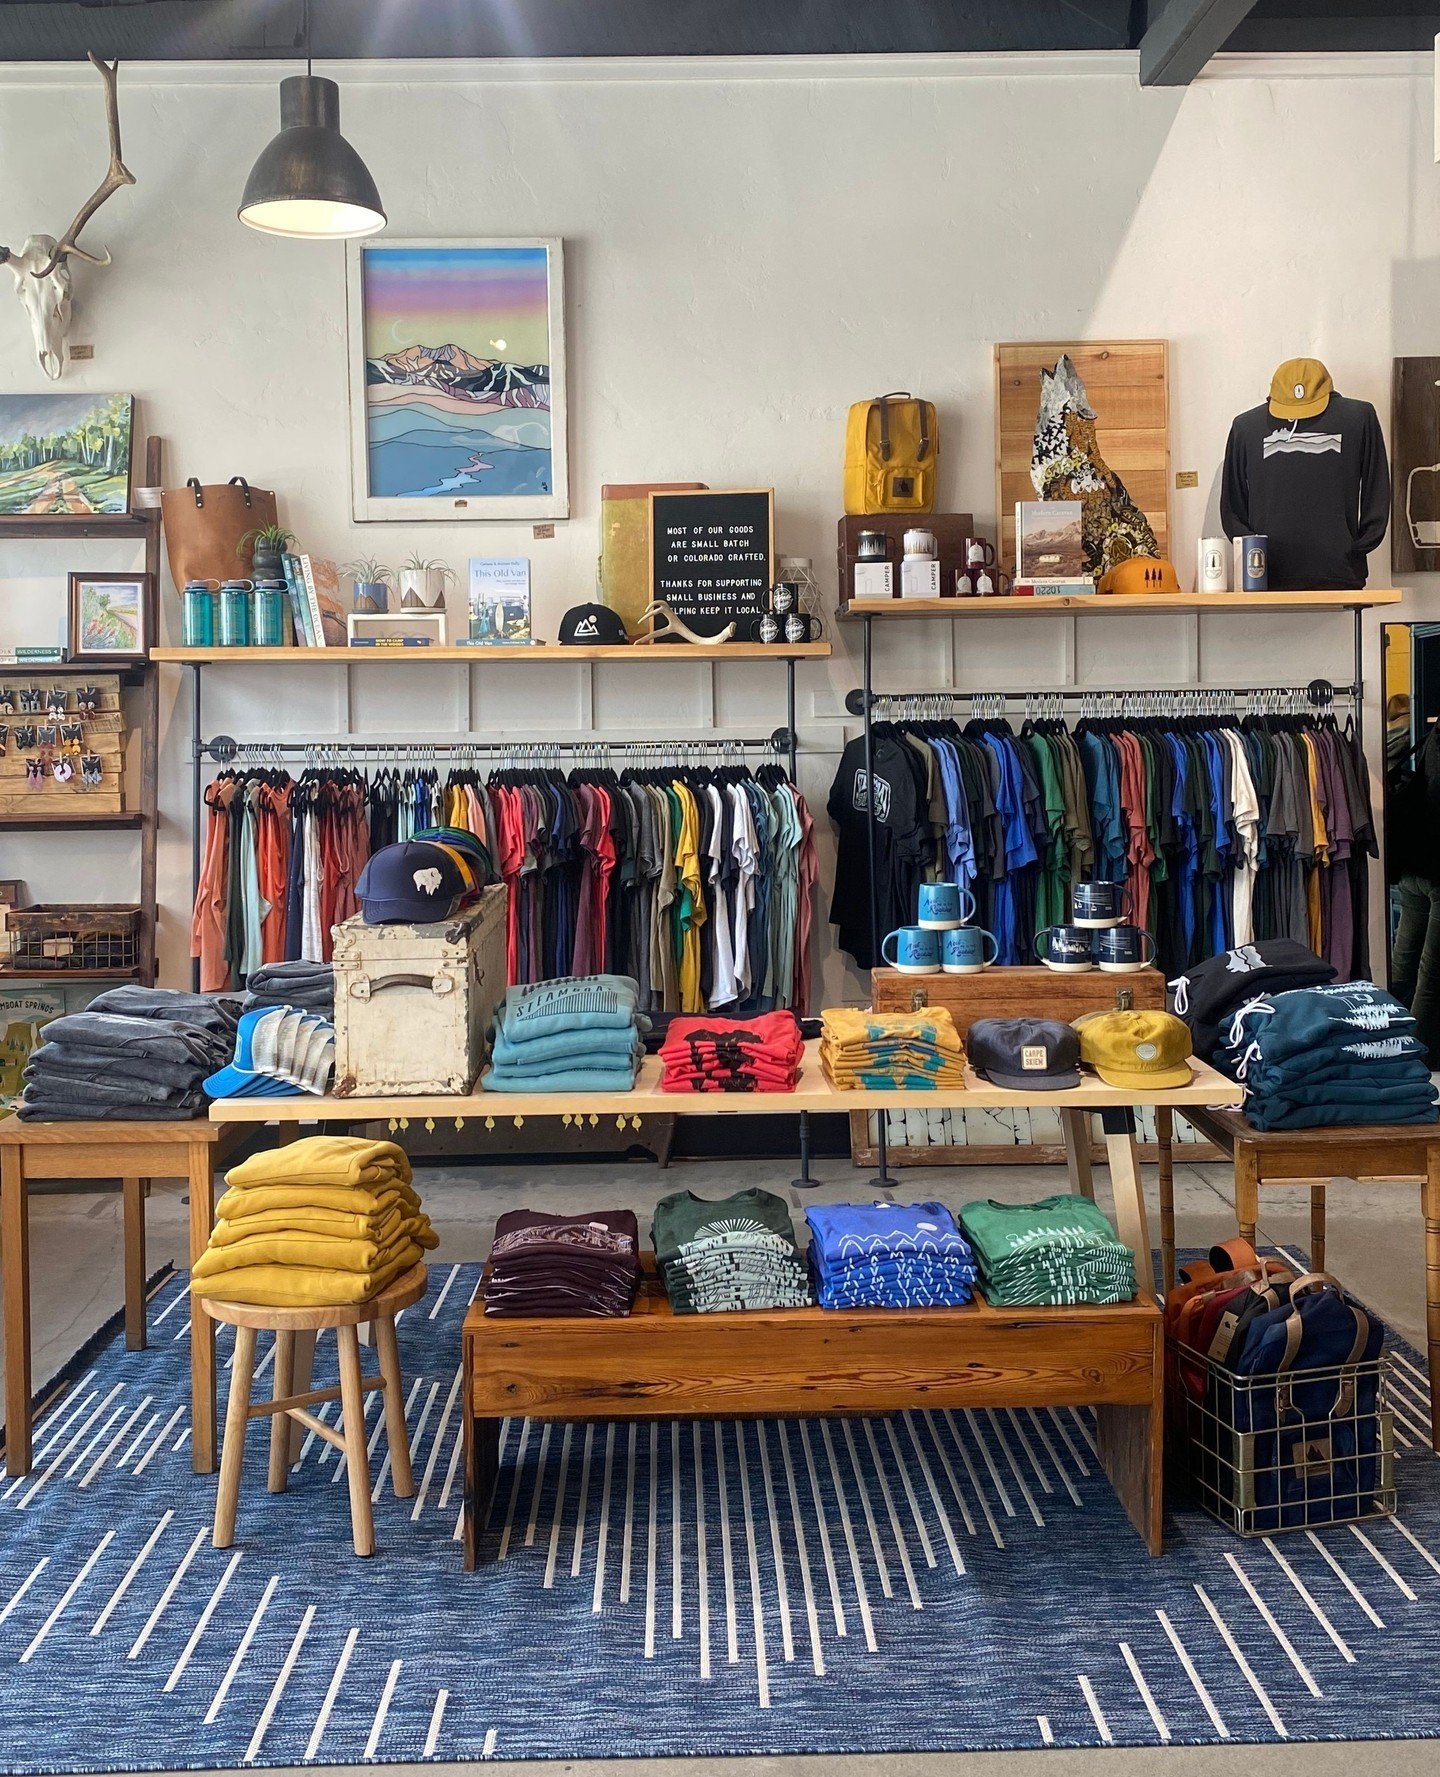 💫 Steamboat shop feeling REFRESHED! 💙⁠
-⁠
-⁠
-